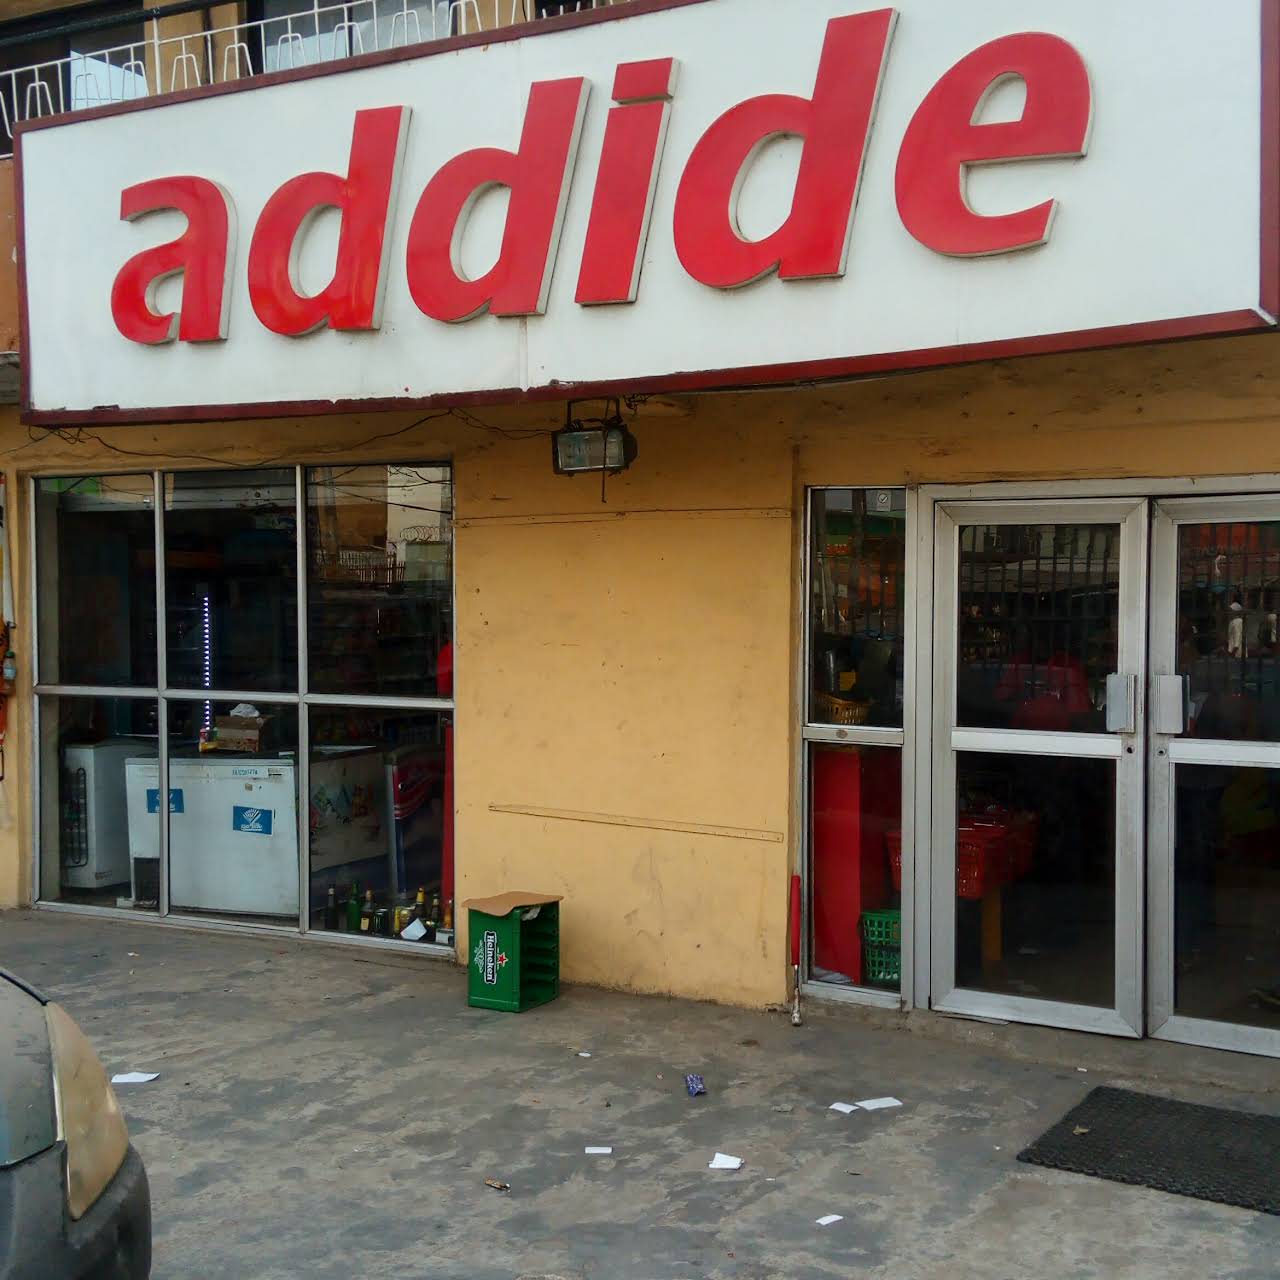 Contact Details of Addide Superstore Malls in Lagos State